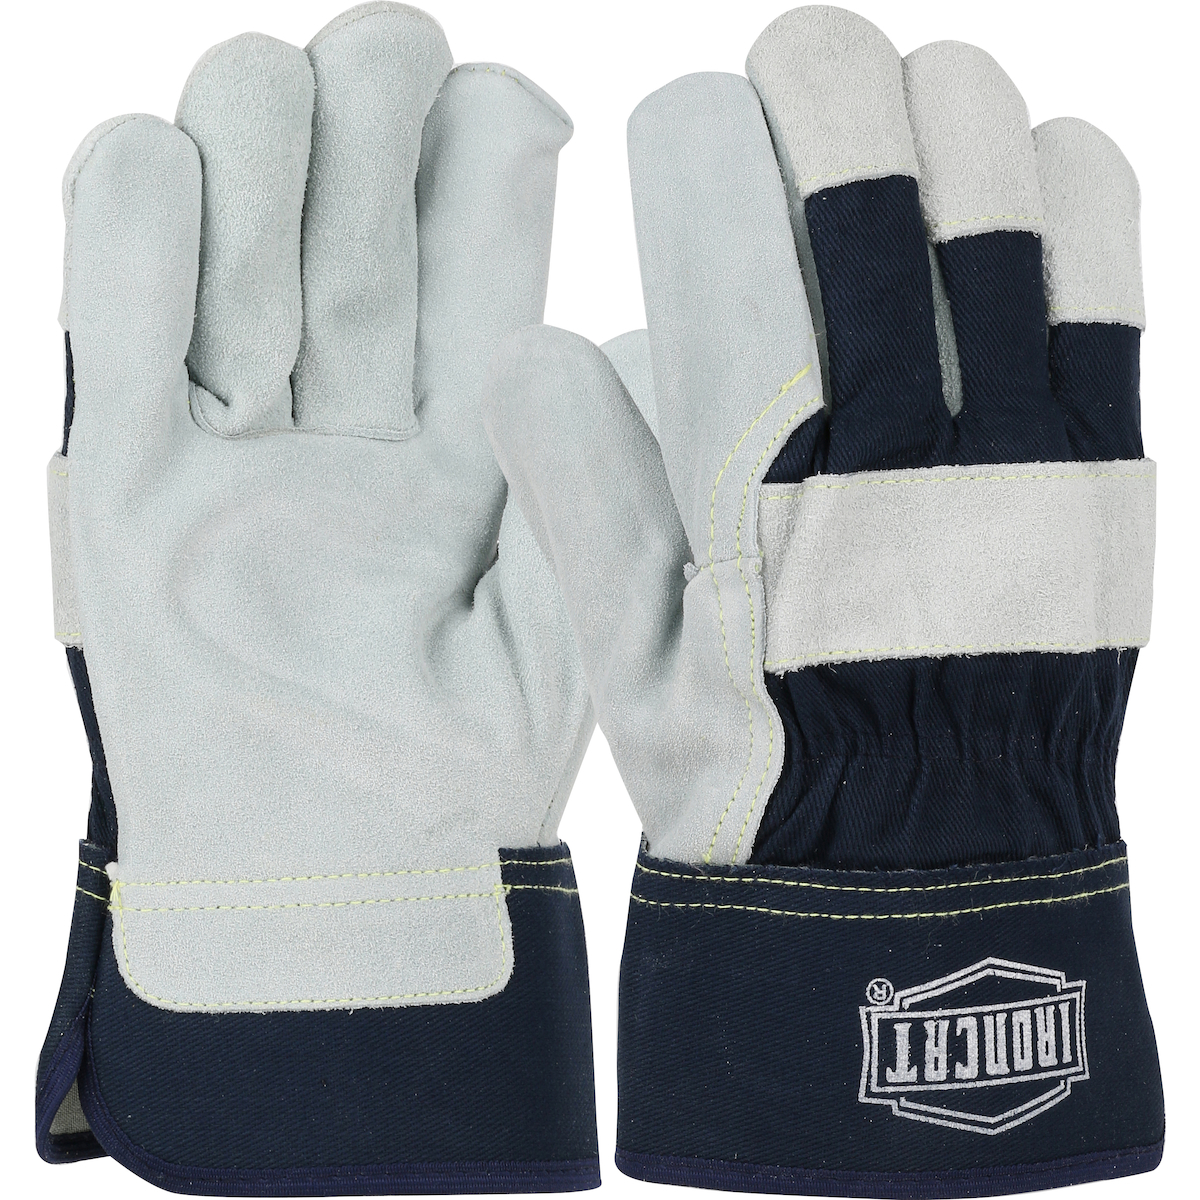 Ironcat® Premium Side Split Cowhide Leather Palm Glove with Canvas Back and Aramid Stitching